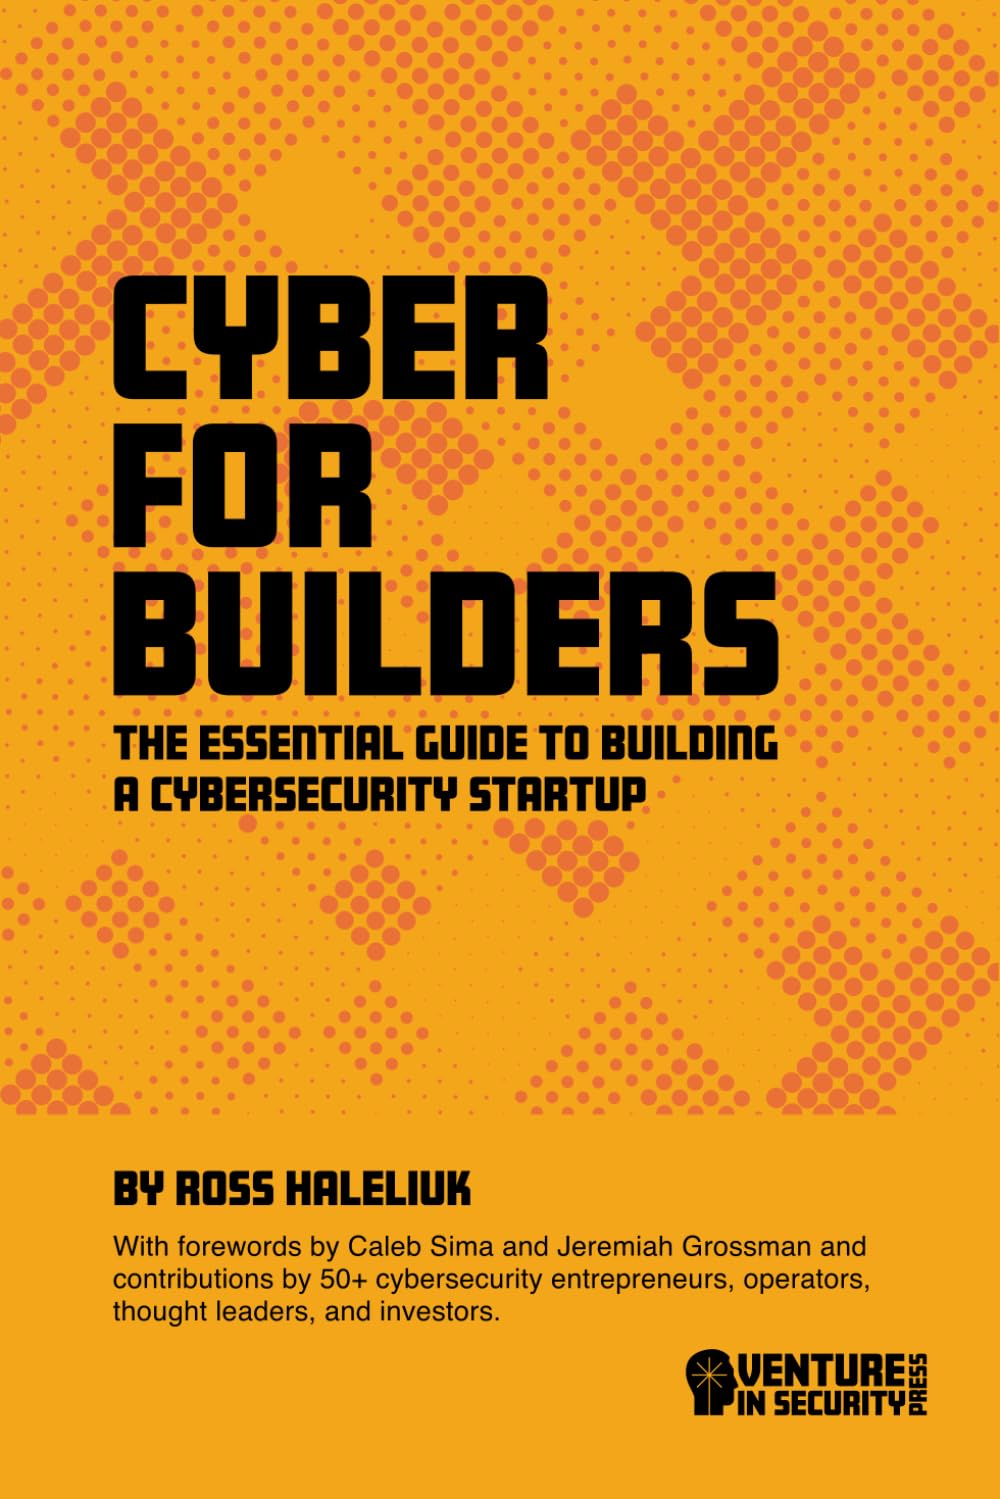 Cyber for Builders: The Essential Guide to Building a Cybersecurity Startup